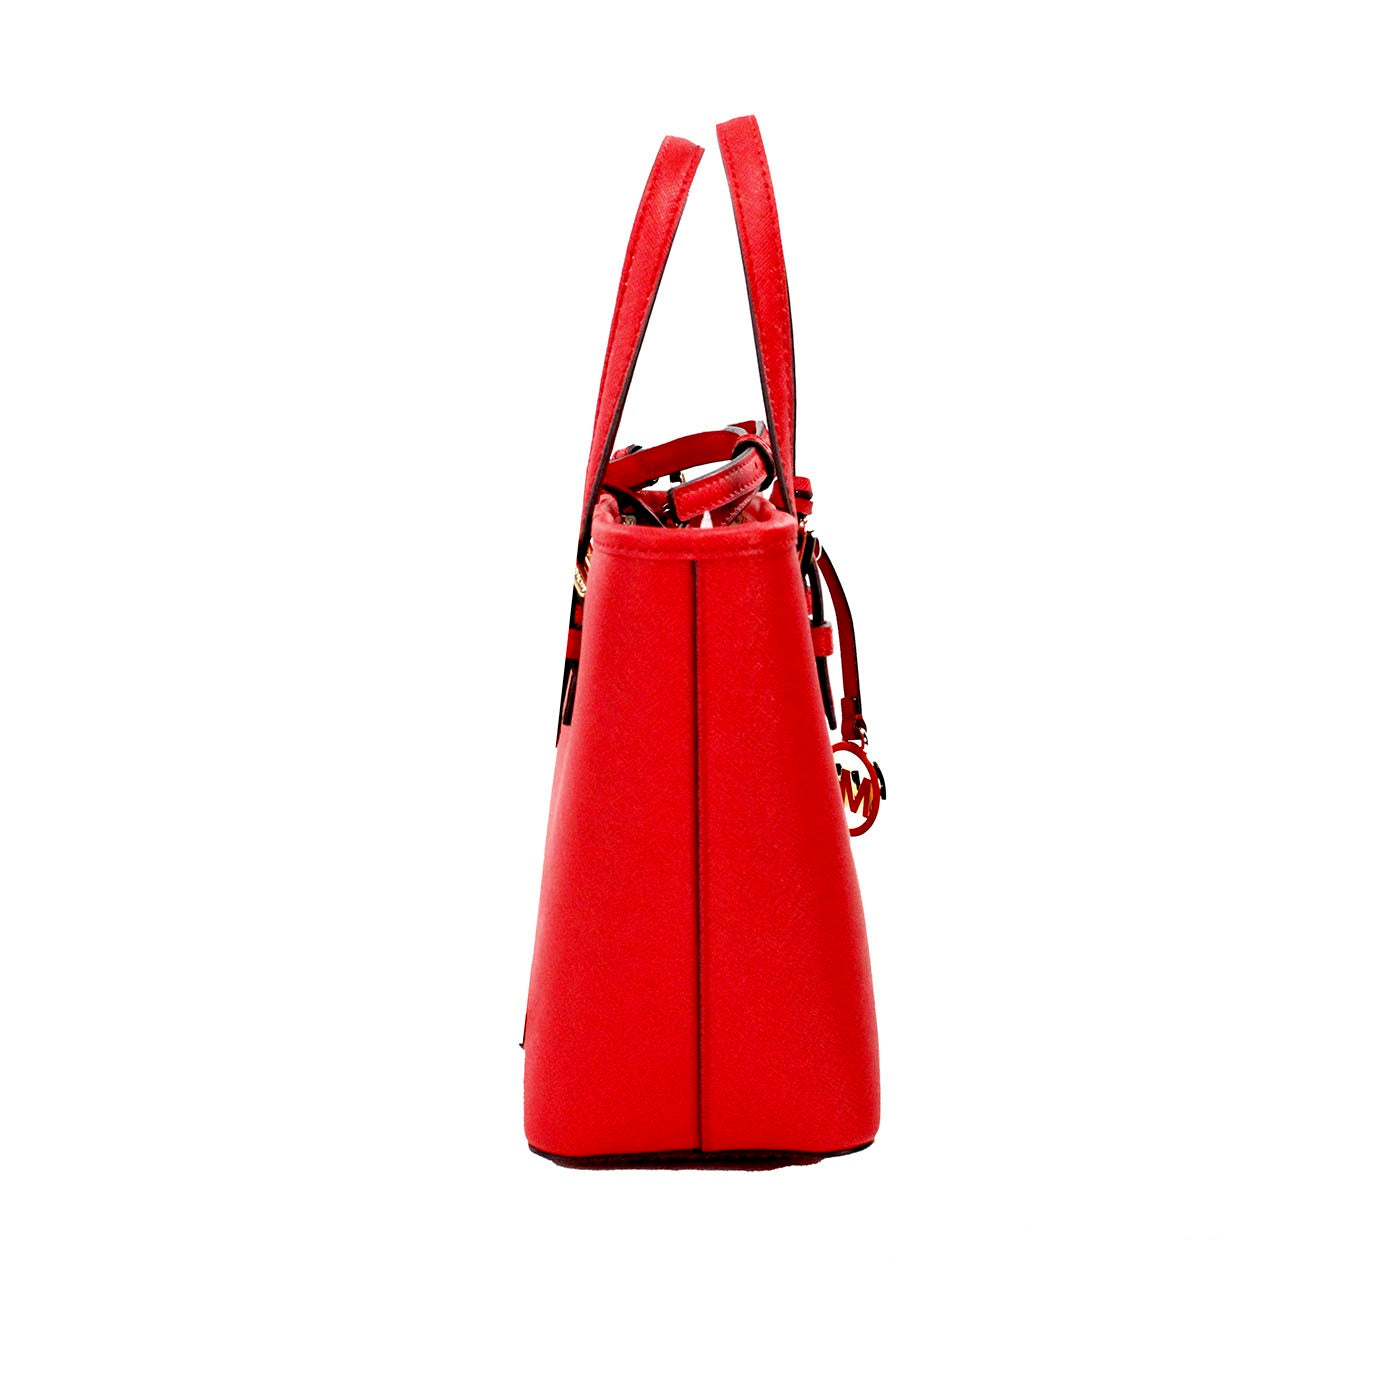 Jet Set Bright Red Leather XS Carryall Top Zip Tote Bag Purse - Divitiae Glamour